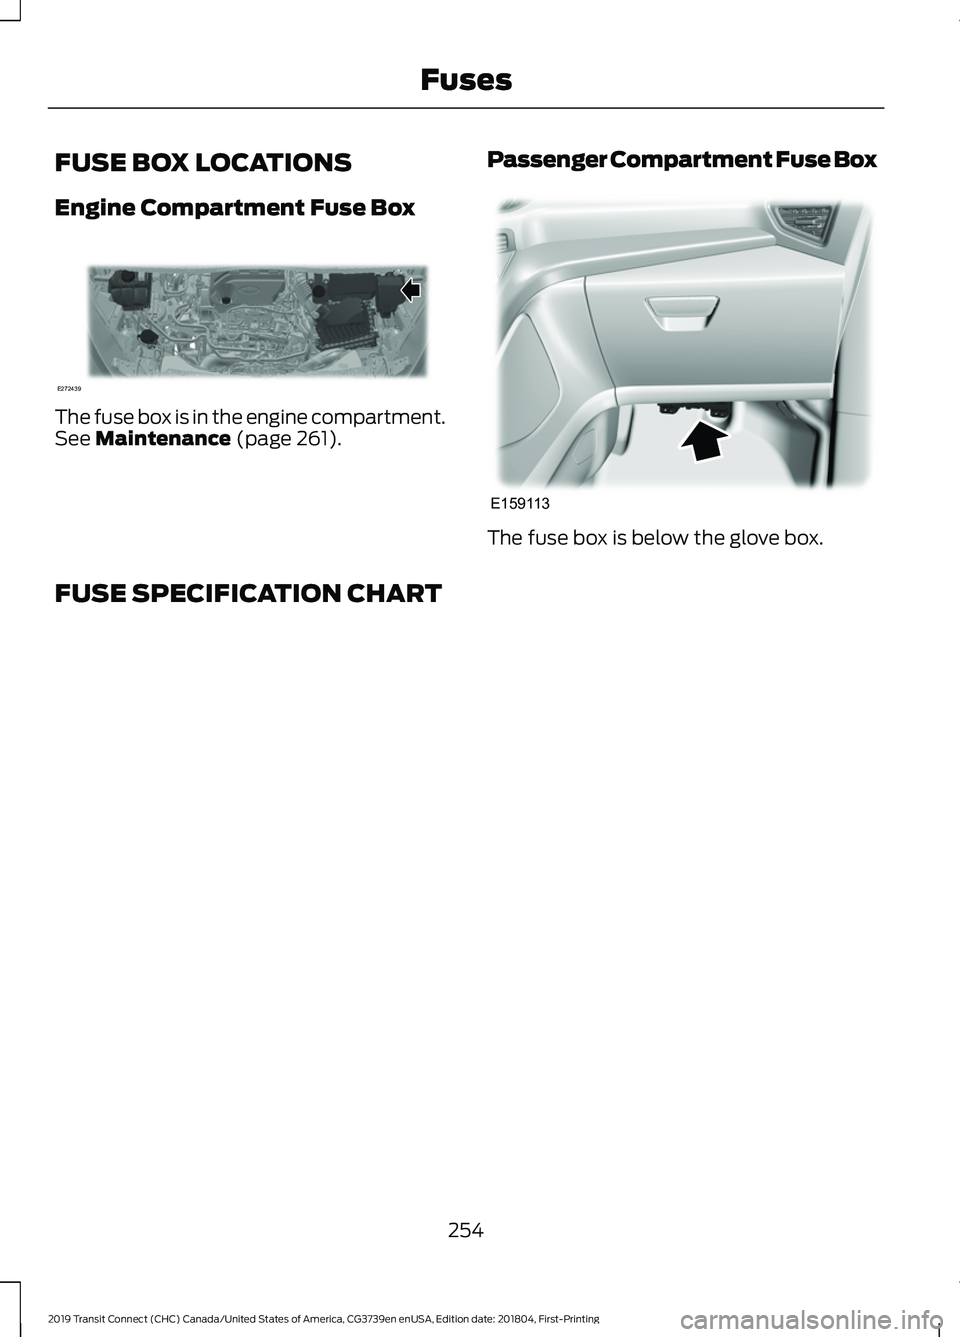 FORD TRANSIT CONNECT 2019  Owners Manual FUSE BOX LOCATIONS
Engine Compartment Fuse Box
The fuse box is in the engine compartment.
See Maintenance (page 261).
Passenger Compartment Fuse Box The fuse box is below the glove box.
FUSE SPECIFICA